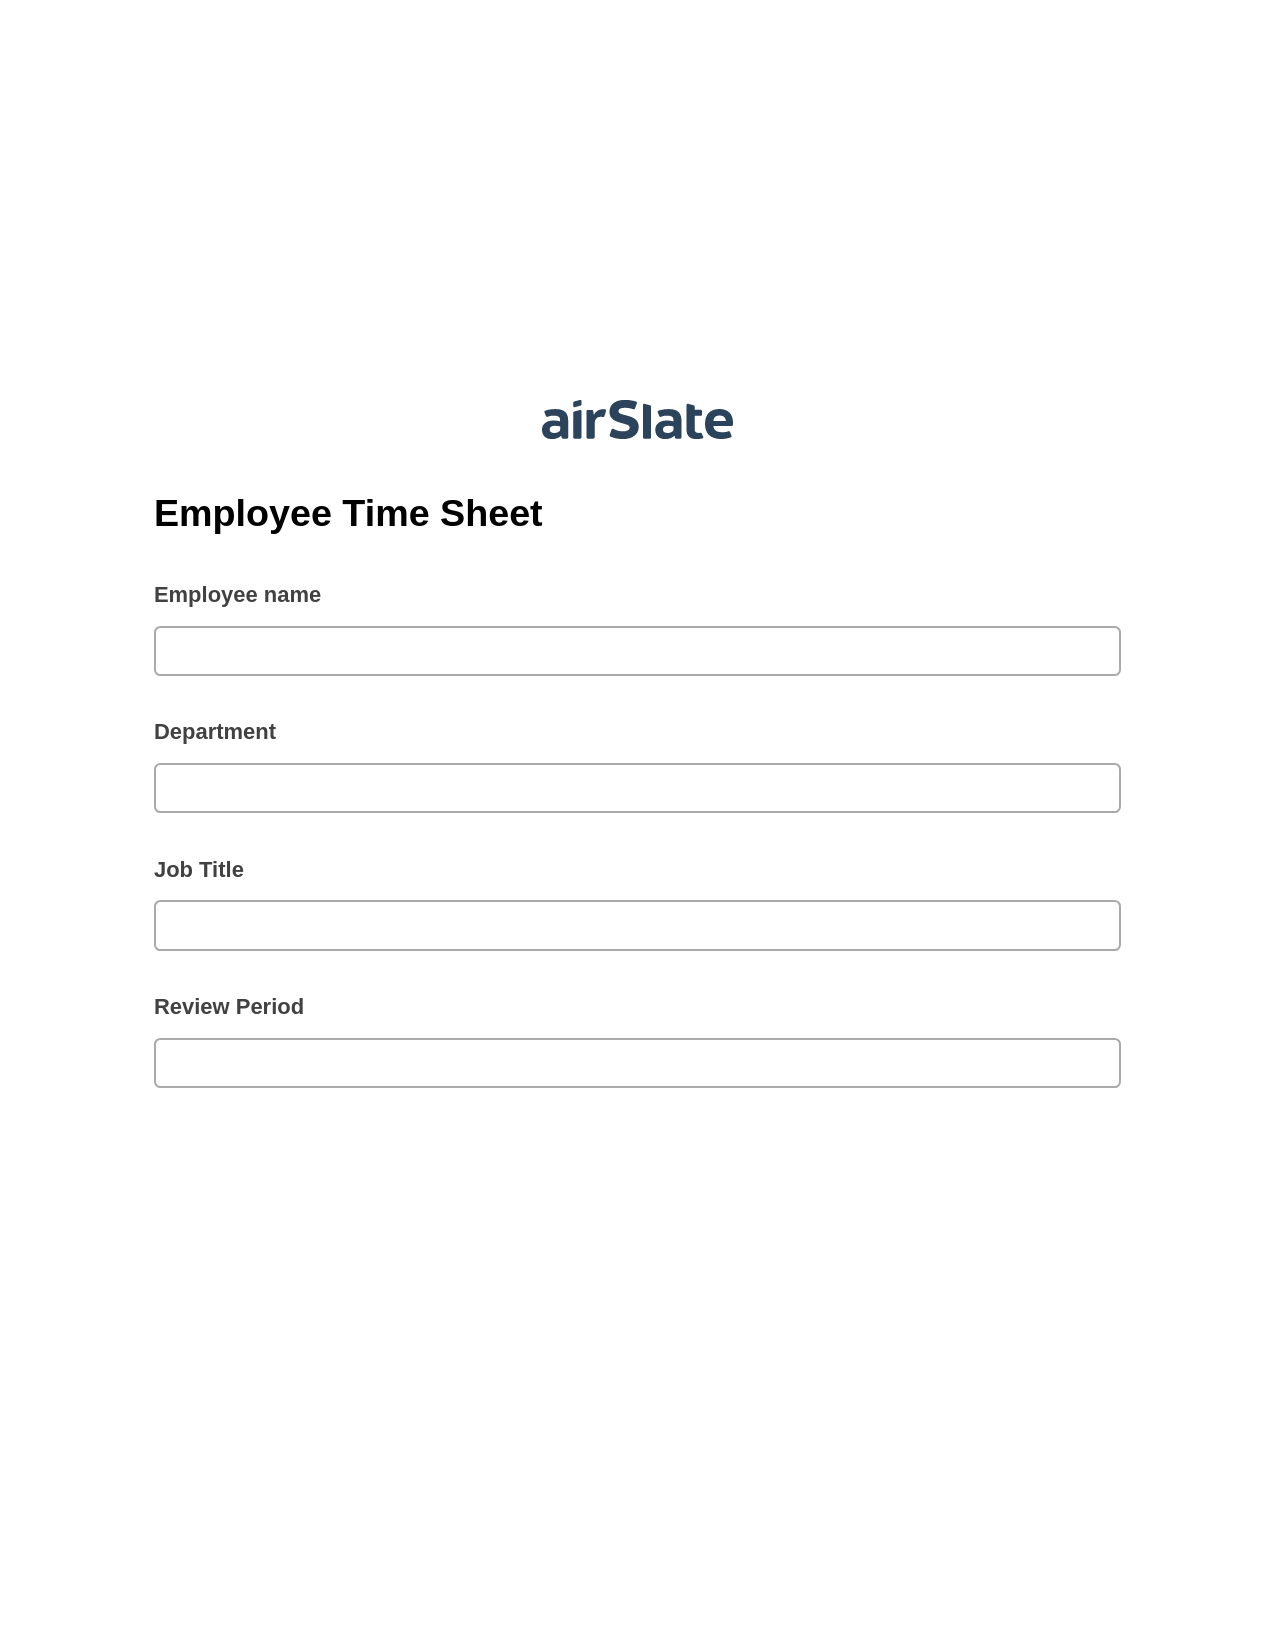 Multirole Employee Time Sheet Pre-fill from Office 365 Excel Bot, Create slate addon, Archive to OneDrive Bot